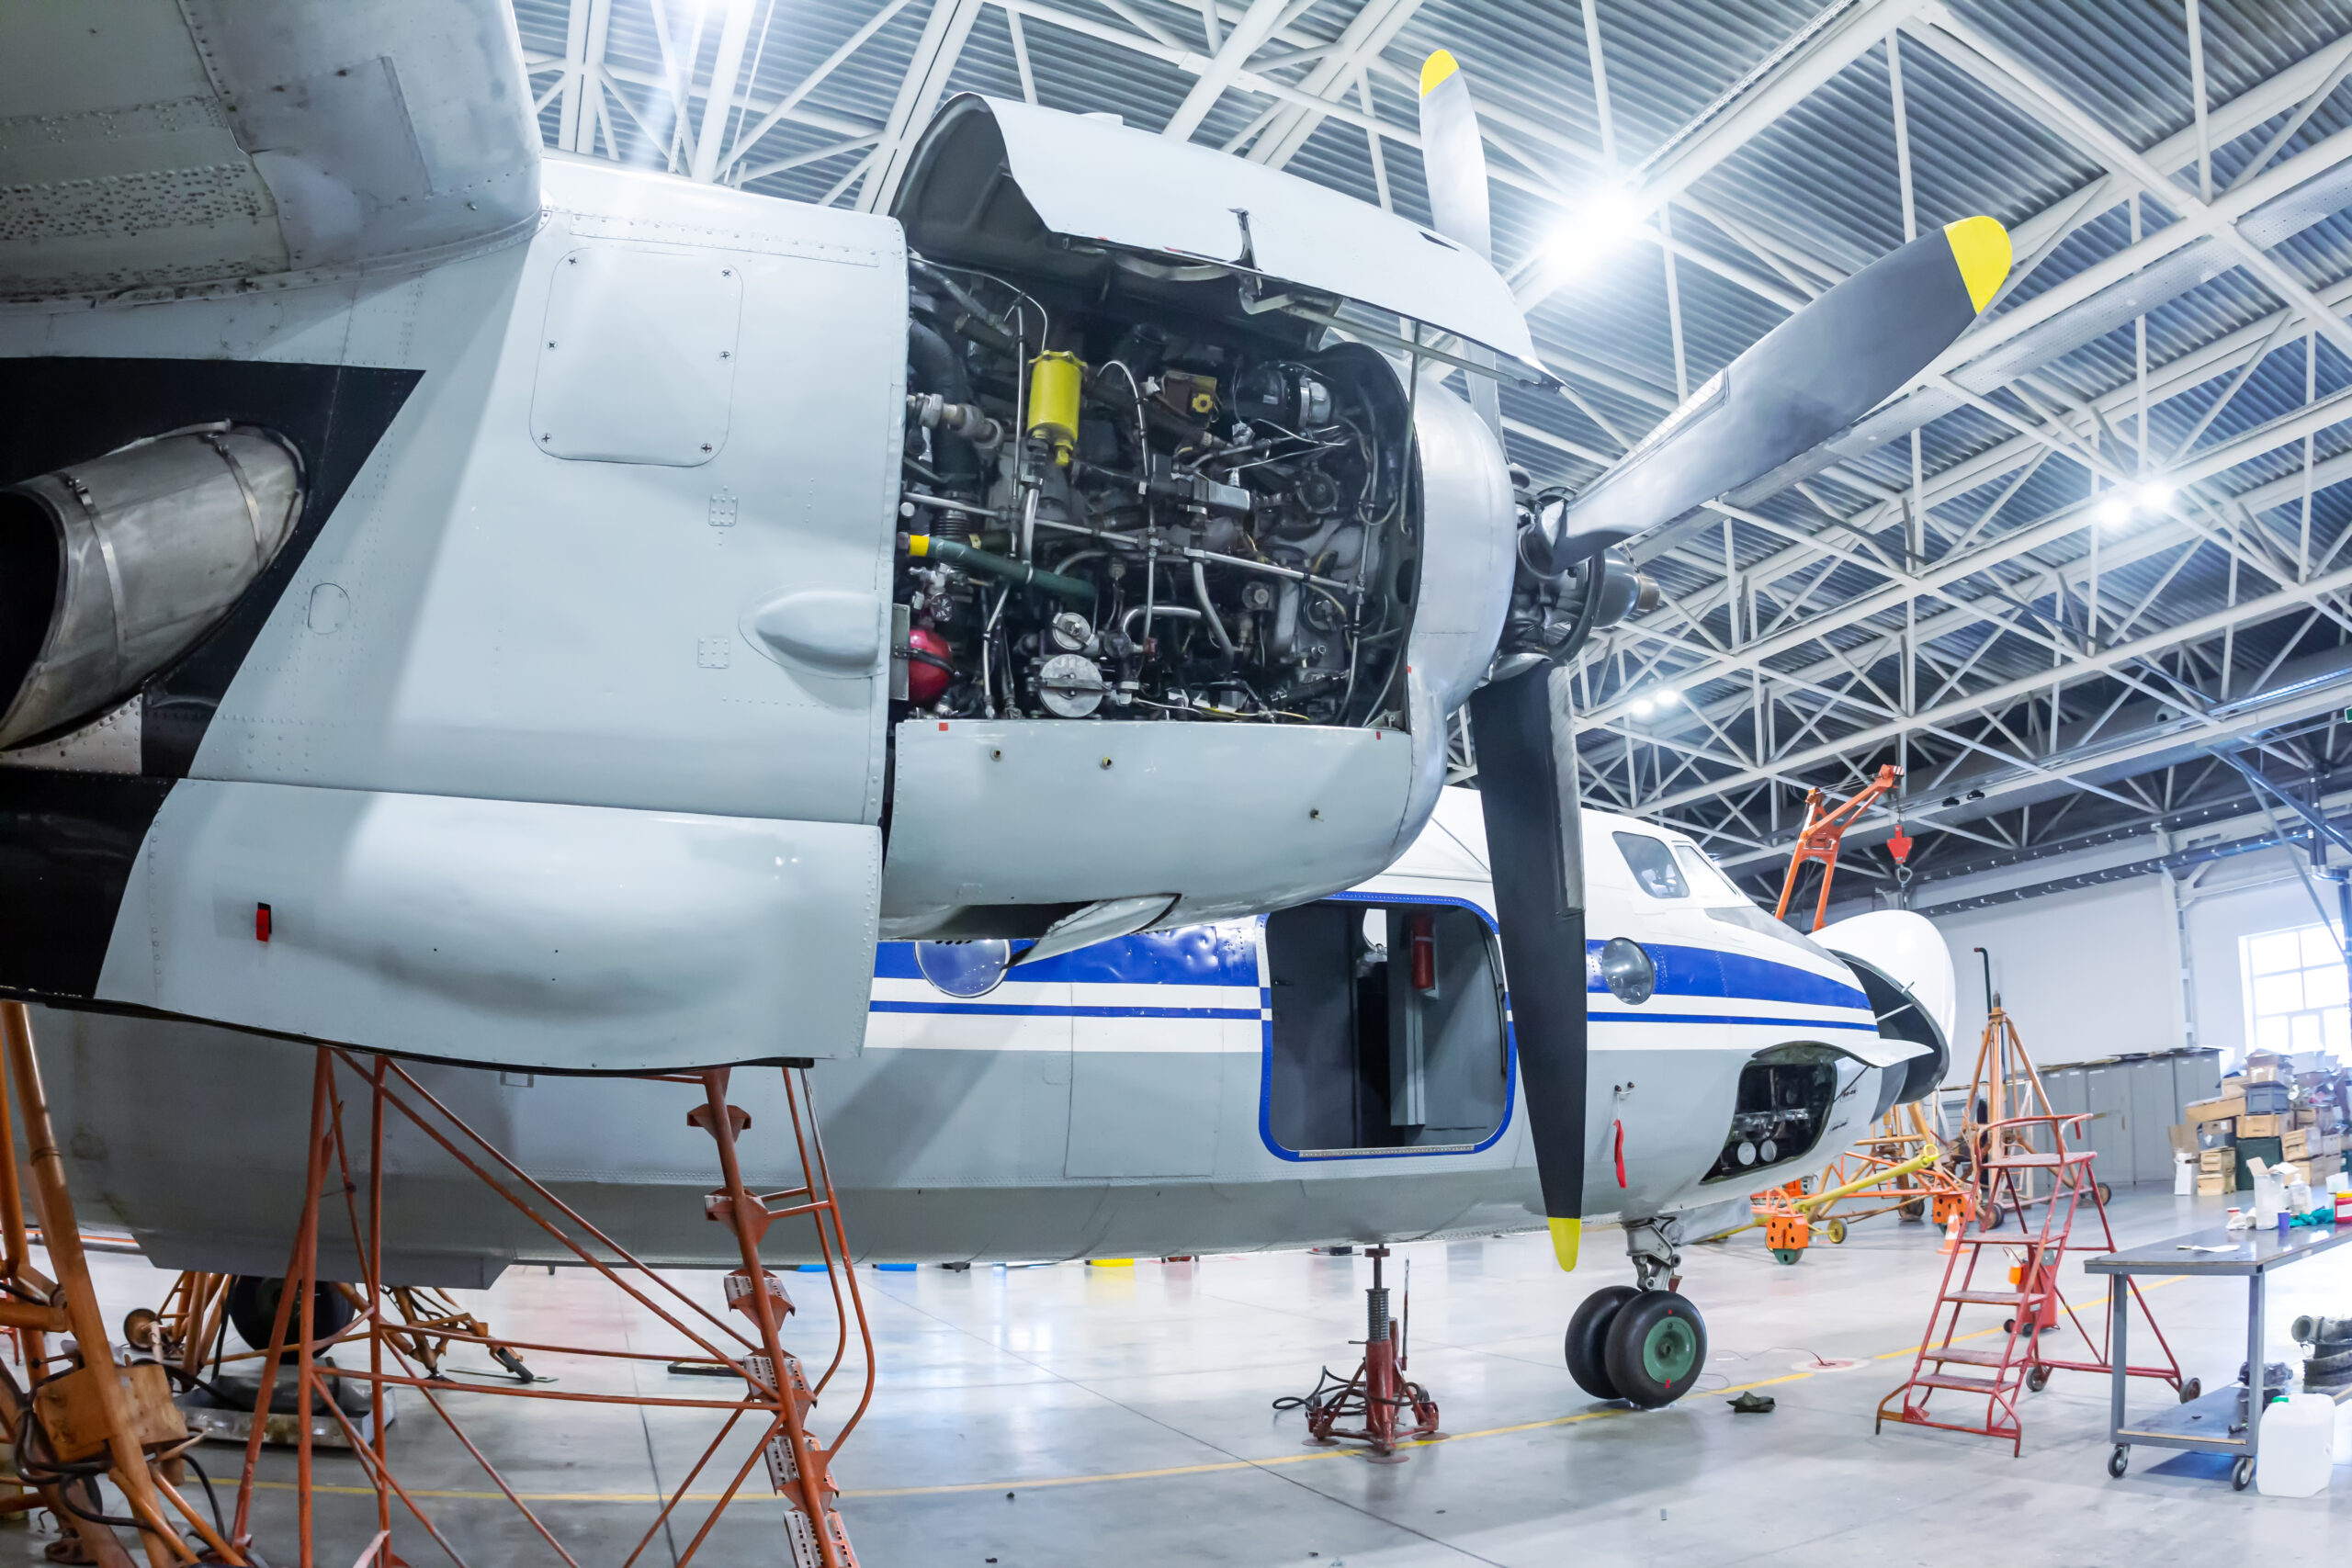 Transport turboprop aircraft in the hangar. Close-up of an open